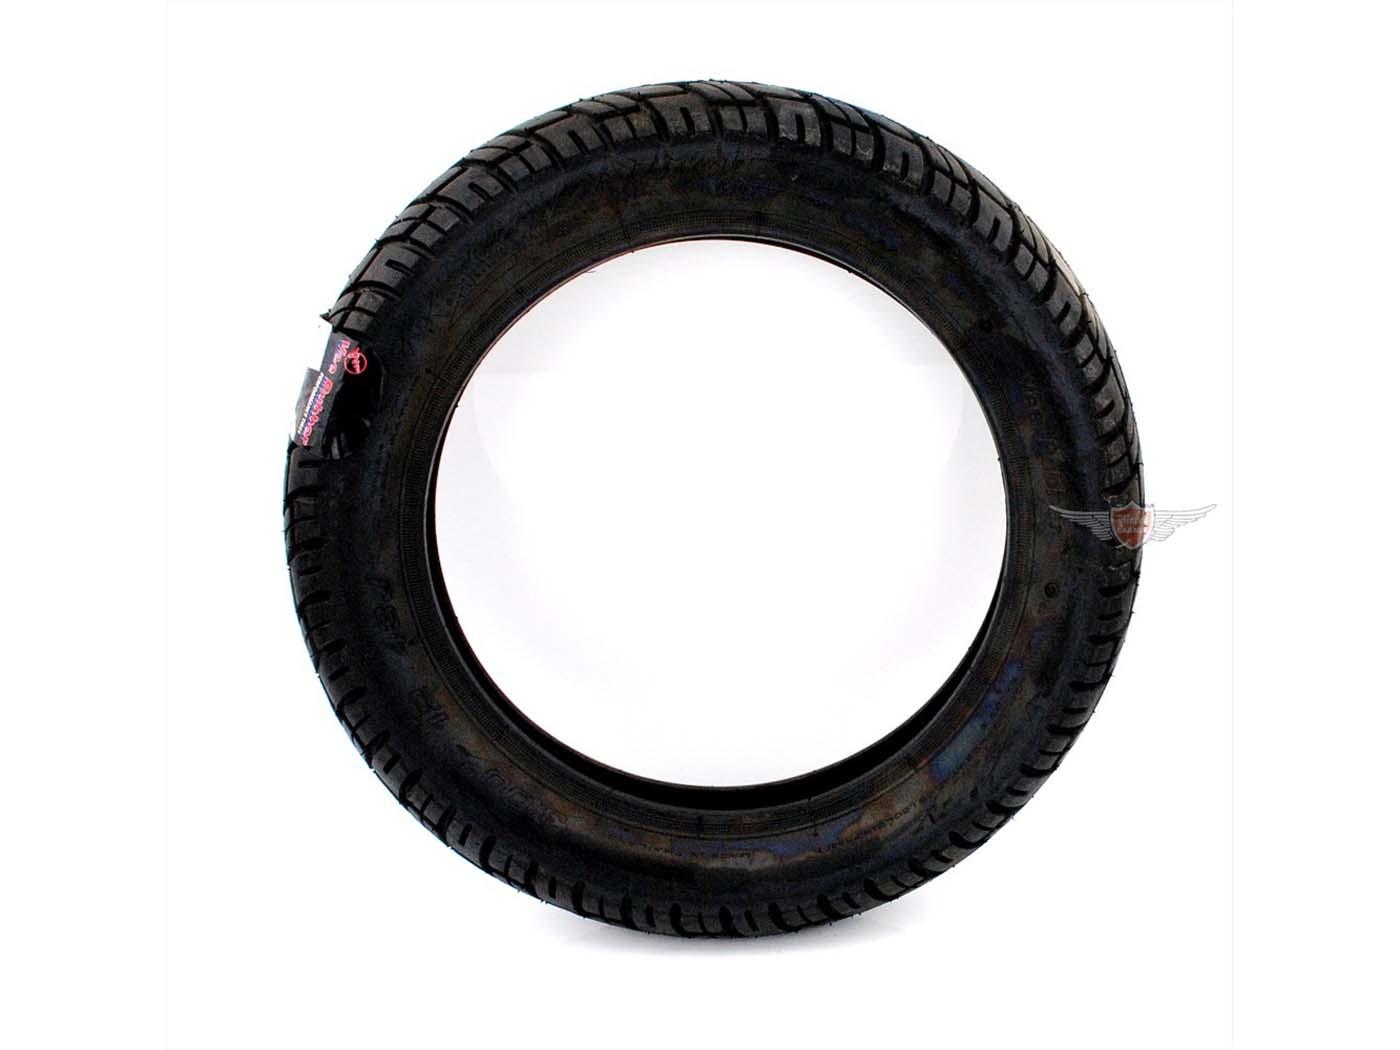 VRM Vee Rubber 100 Km/h Tires For Moped, Moped, Mokick, Scooter